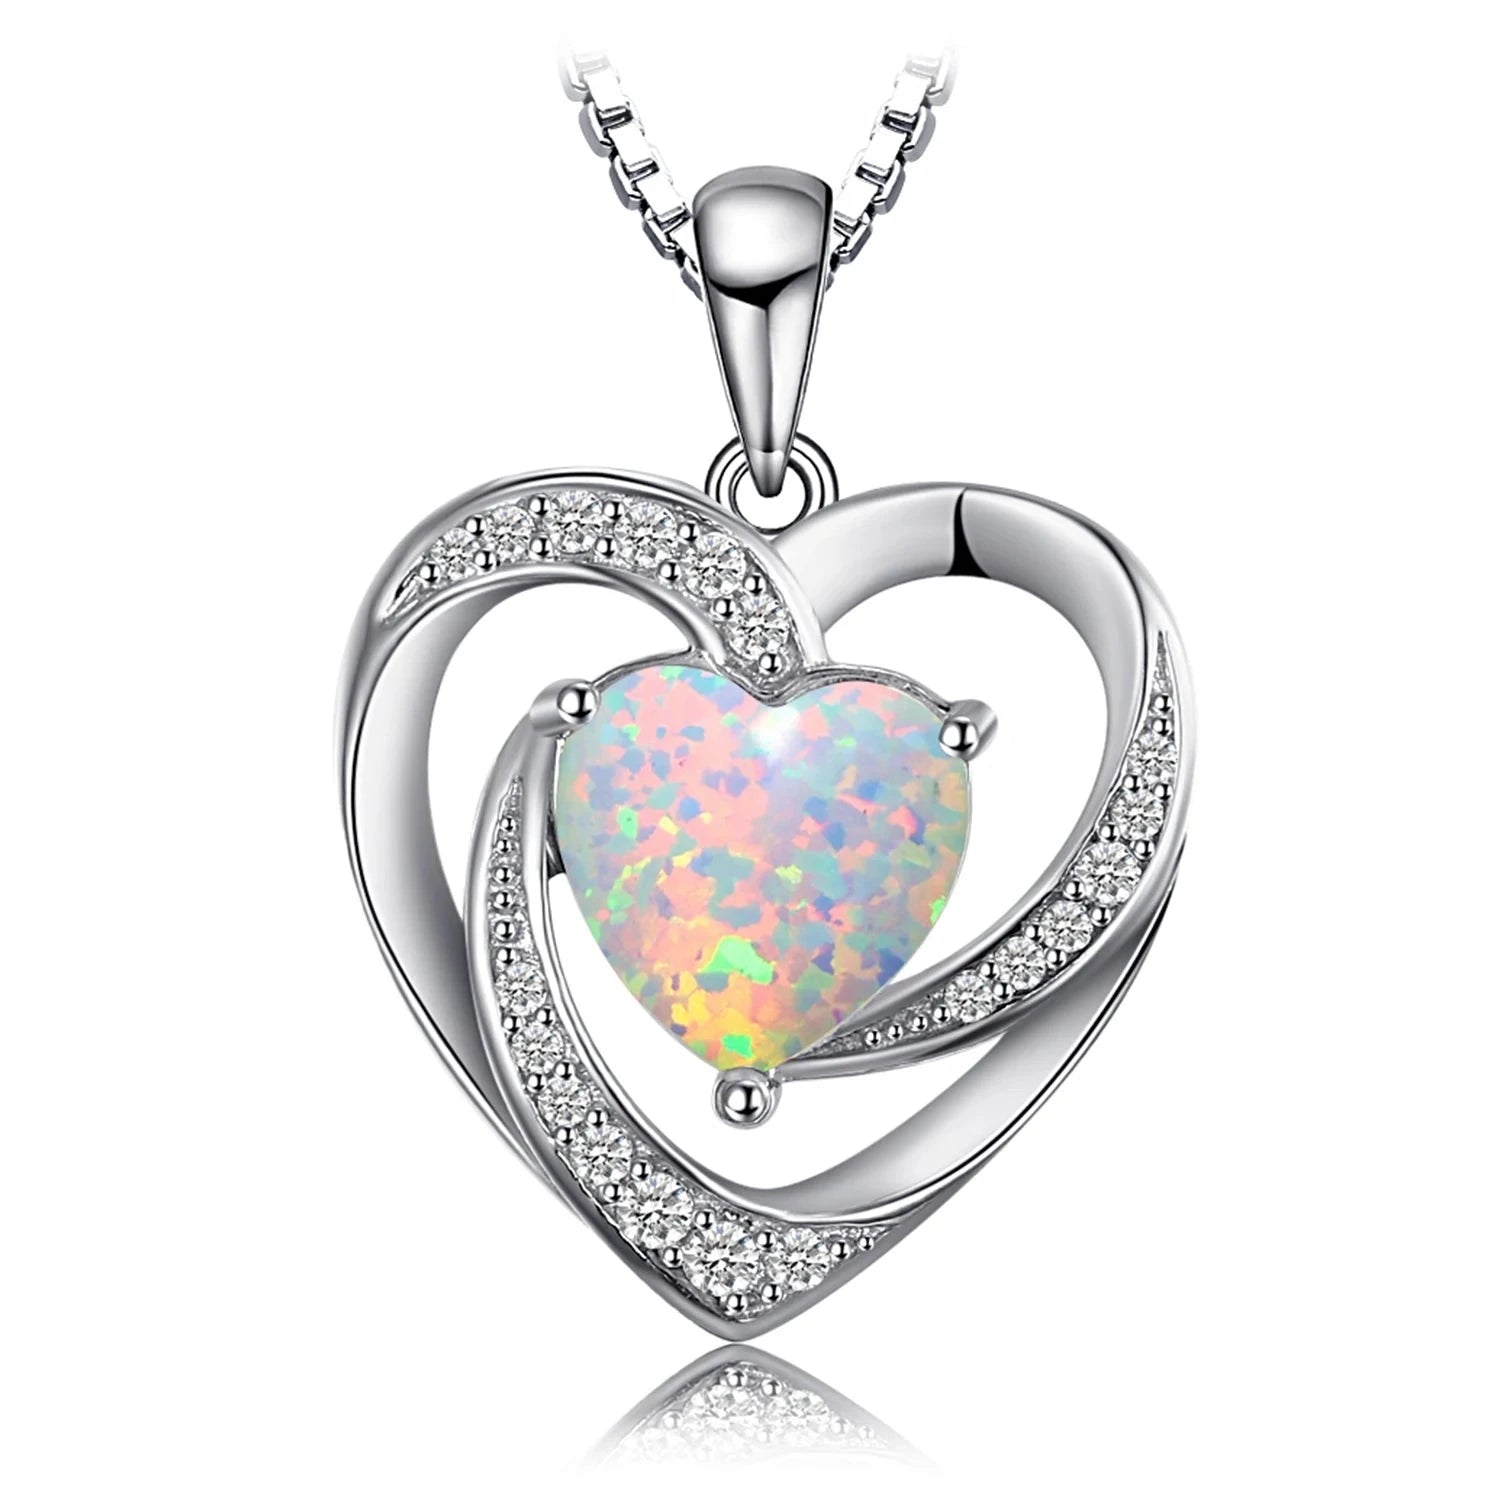 Heart Love 2.4ct Created Opal 925 Sterling Silver Pendant Necklace for Women No Chain